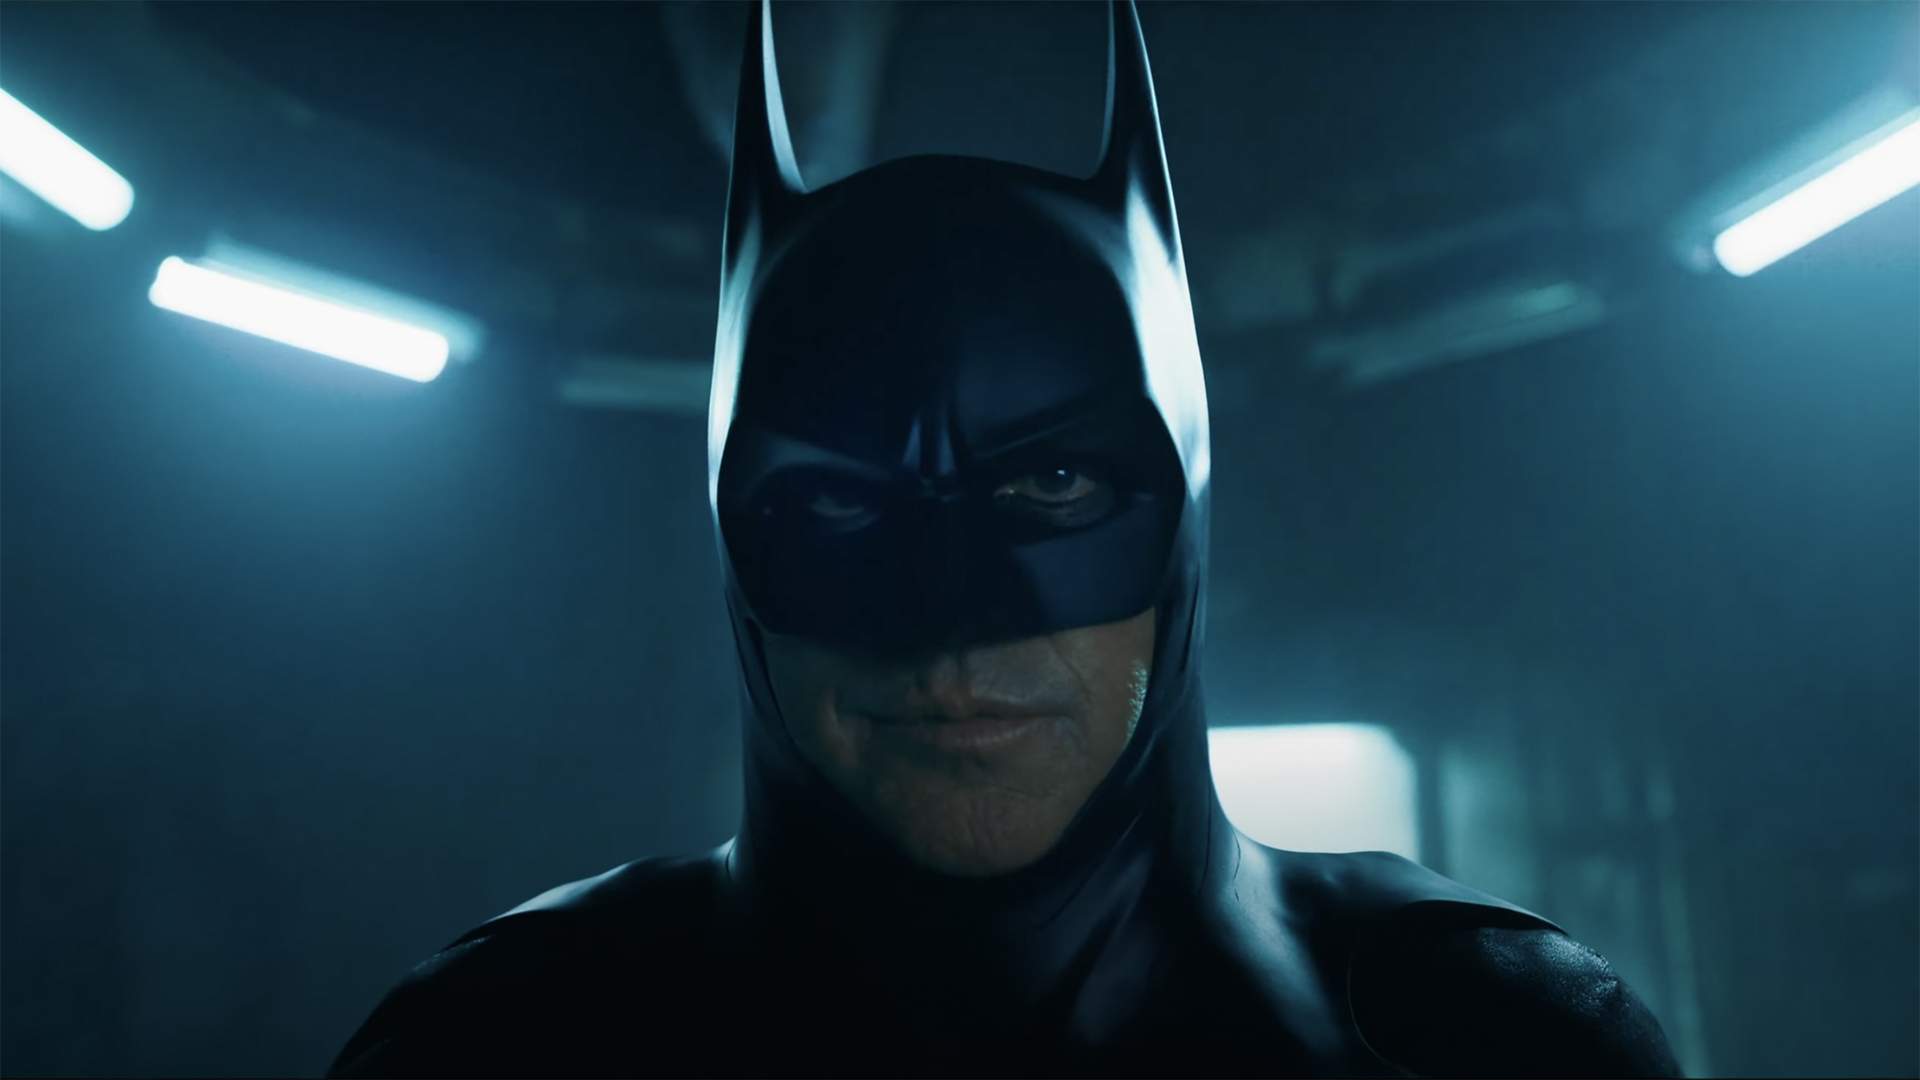 The First Trailer for 'The Flash' Is Here with Both Ben Affleck and Michael Keaton as Batman